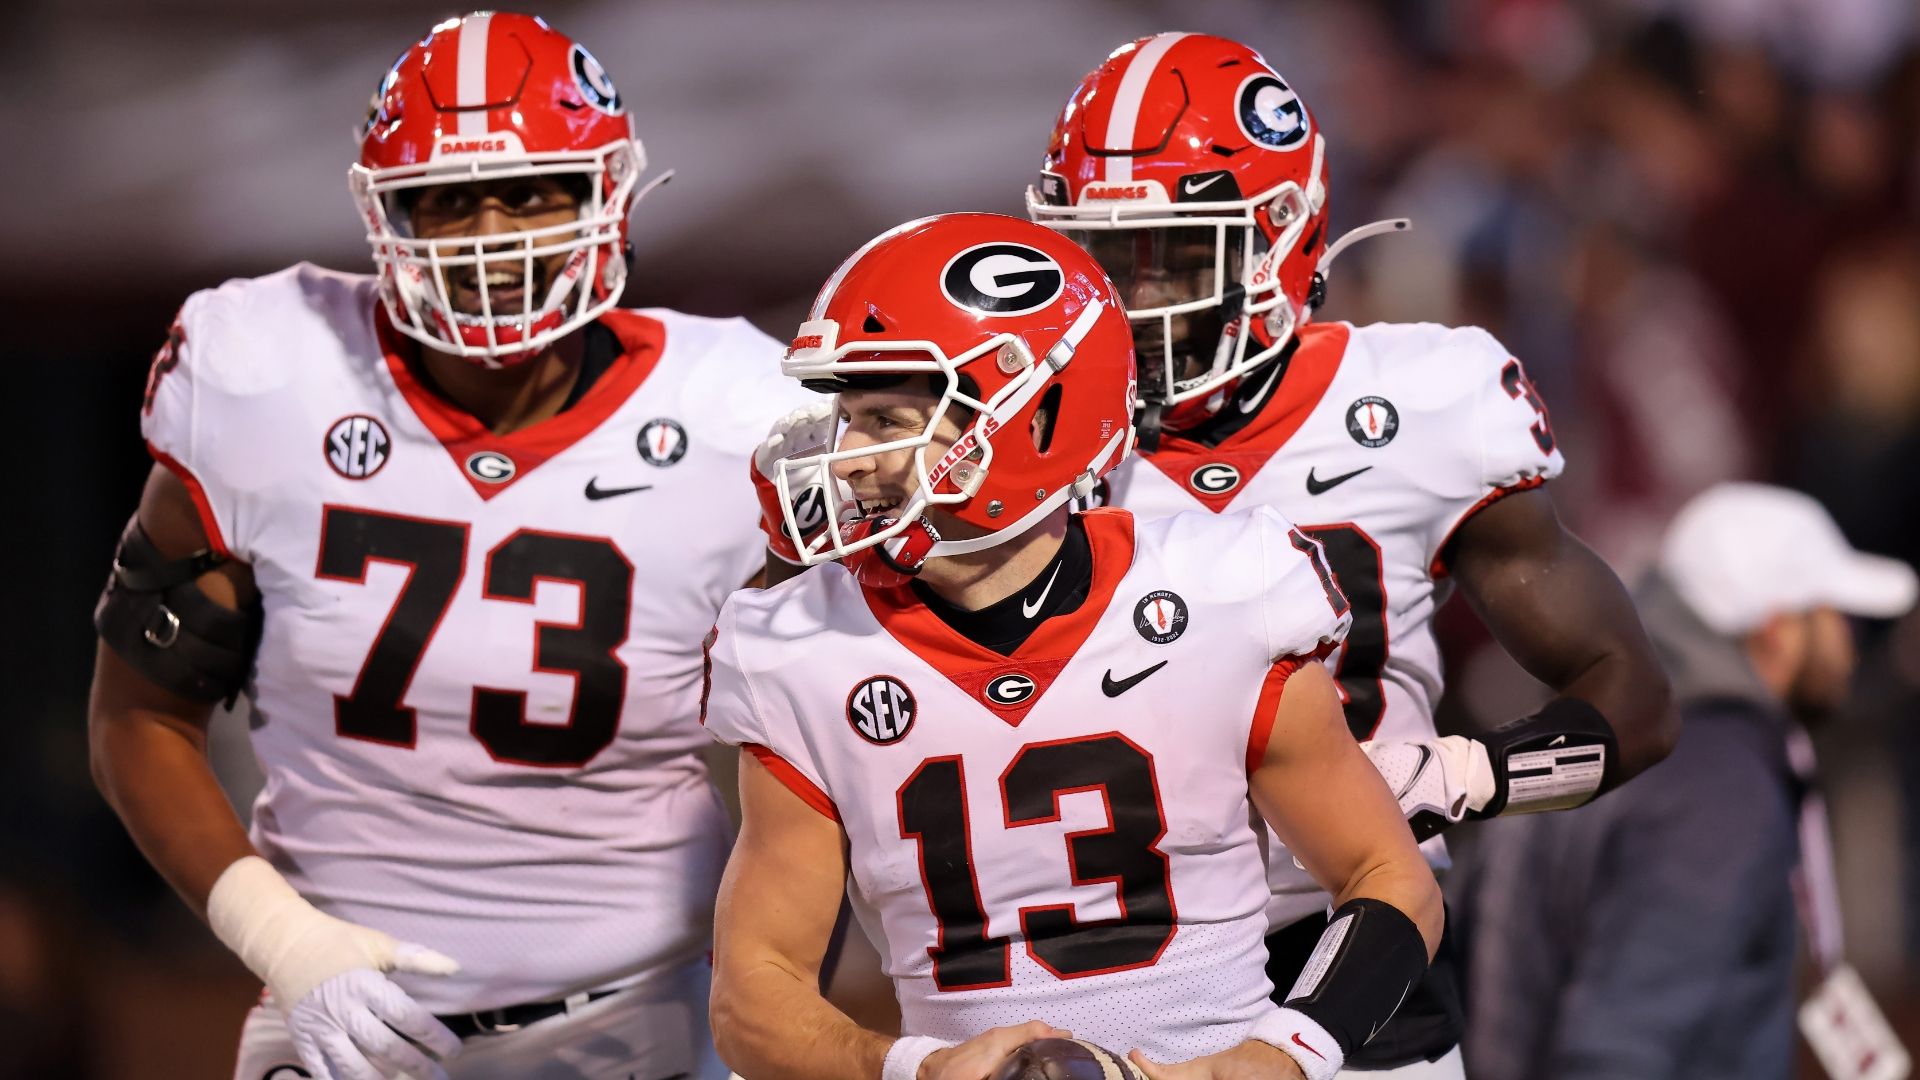 No. 1 Georgia clinches SEC East with win at MS State